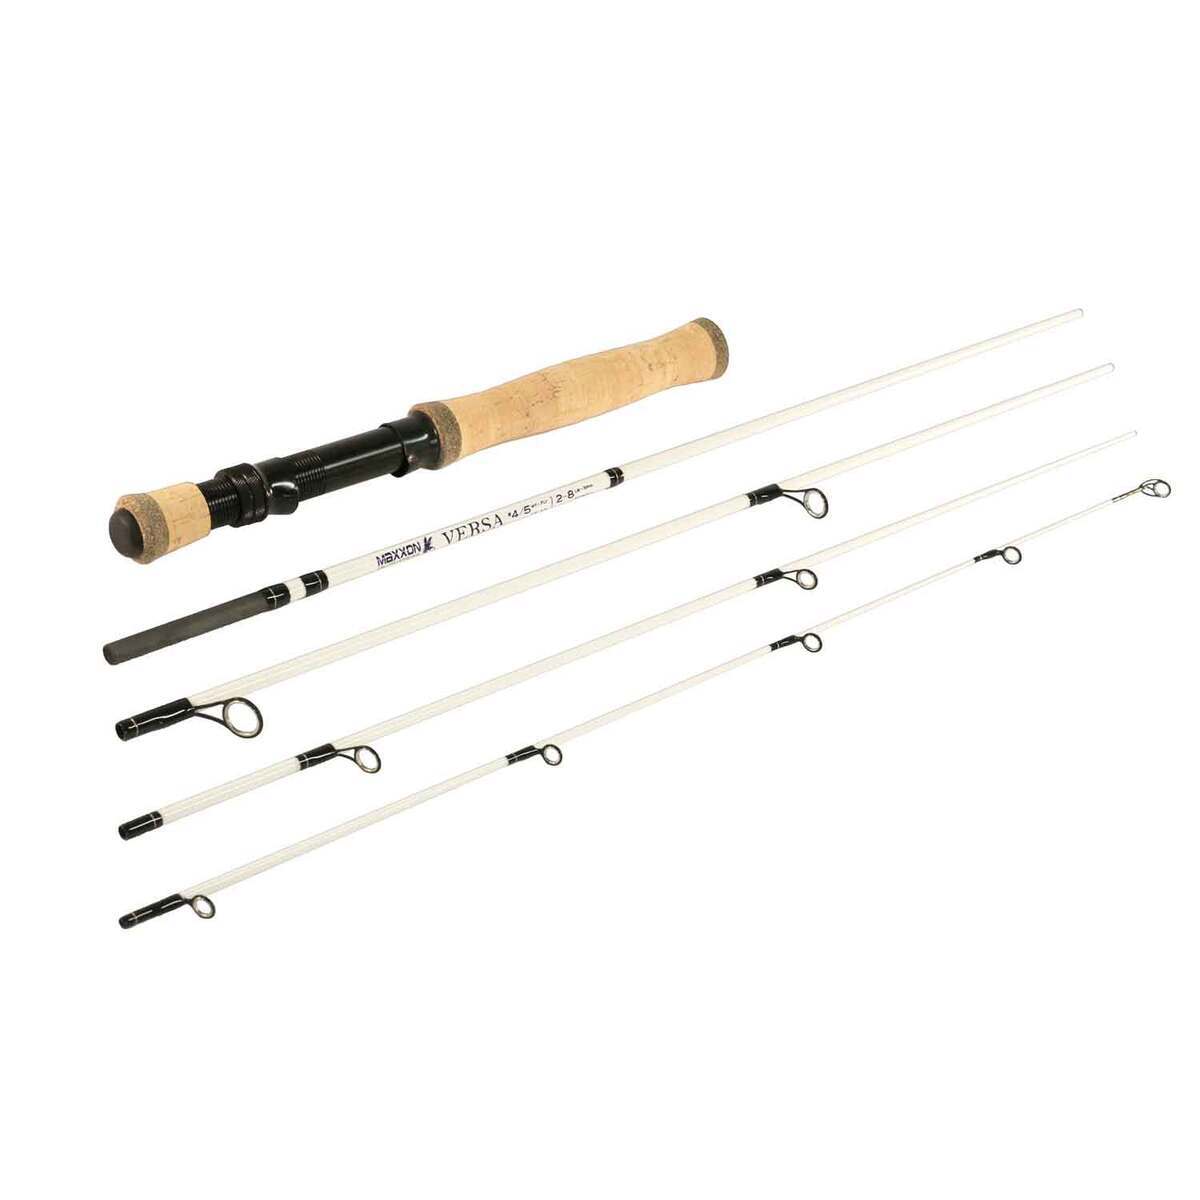 Maxxon Outfitters MO 76V5-4 Versa Fly Rod, 7 ft 6 in OAL